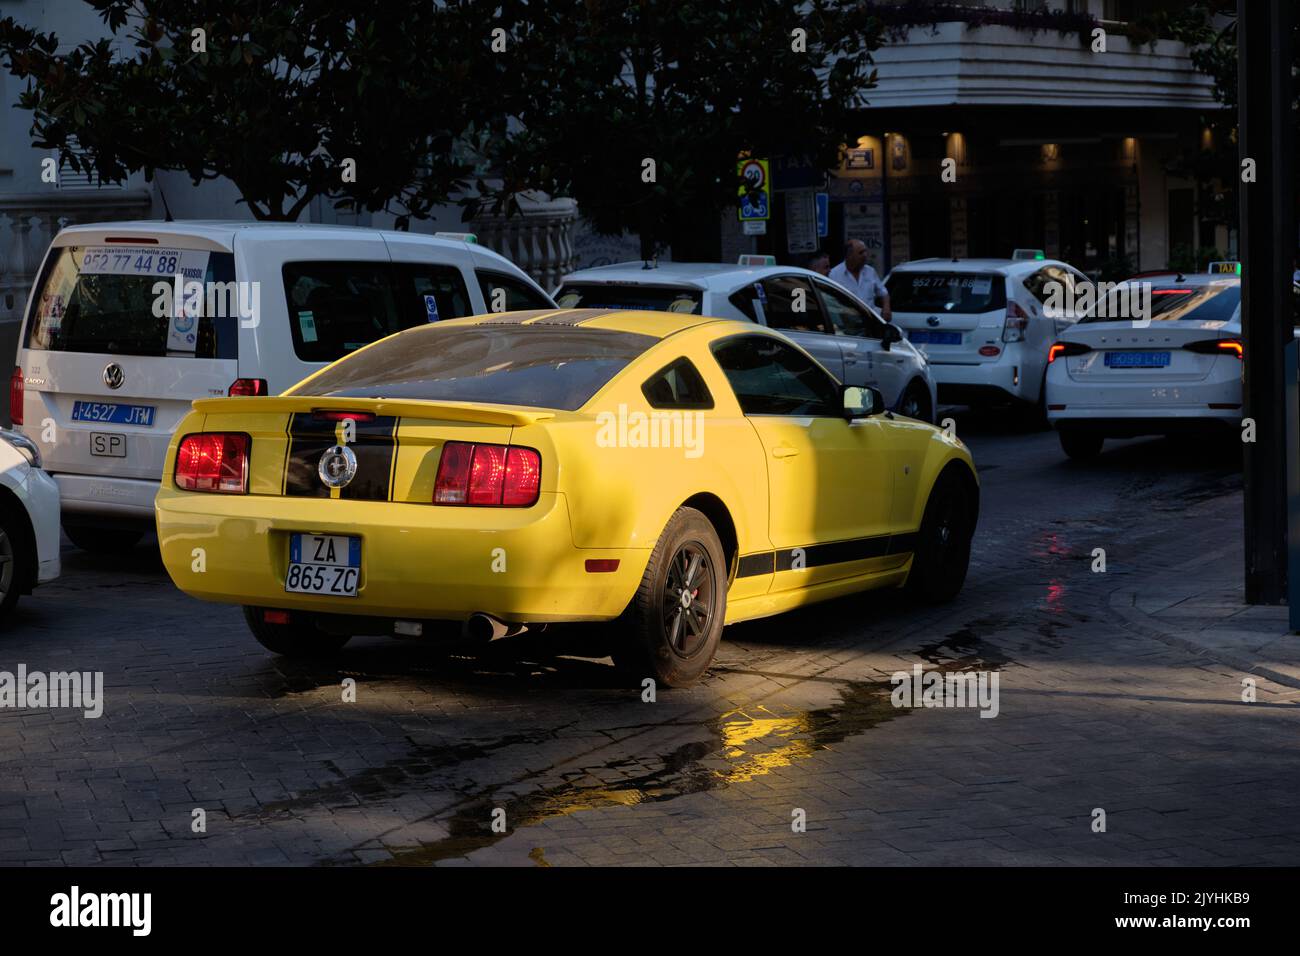 2005-2014 Ford Mustang (fifth generation) in Marbella city centre. Malaga province, Spain Stock Photo